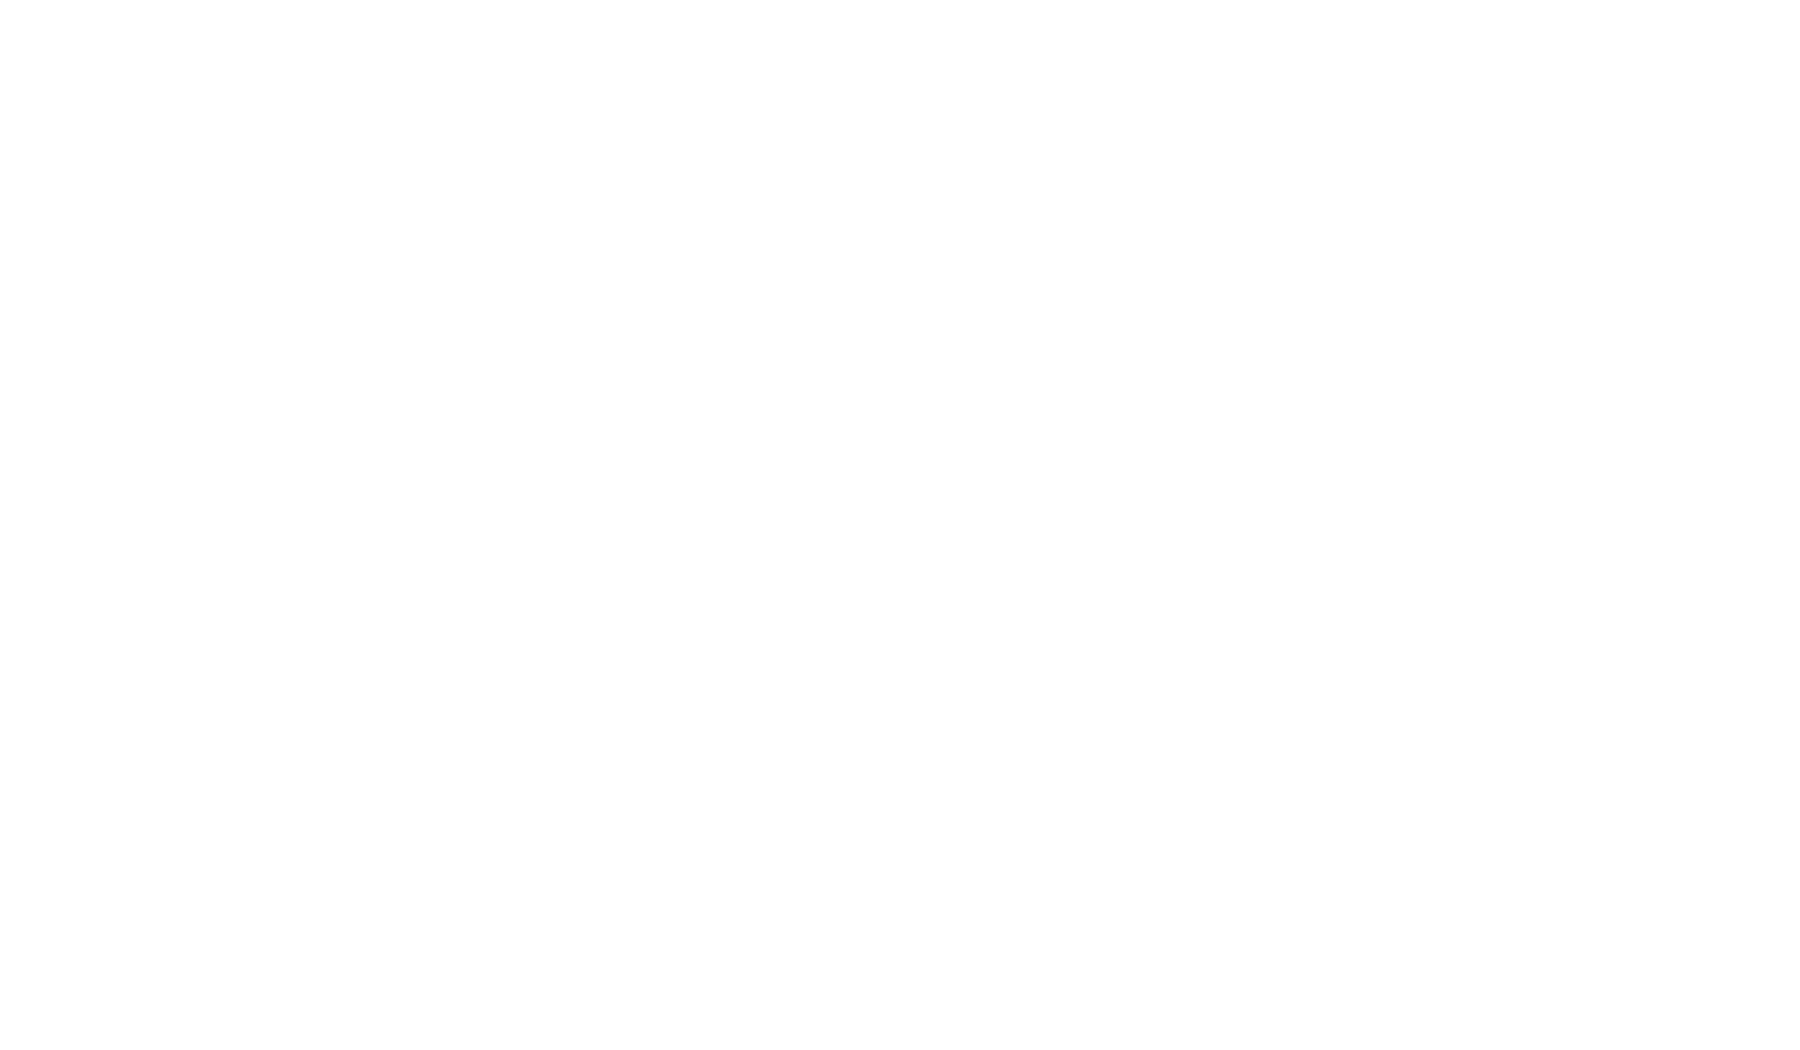 Waldrop and Colvin, the law department for your business logo